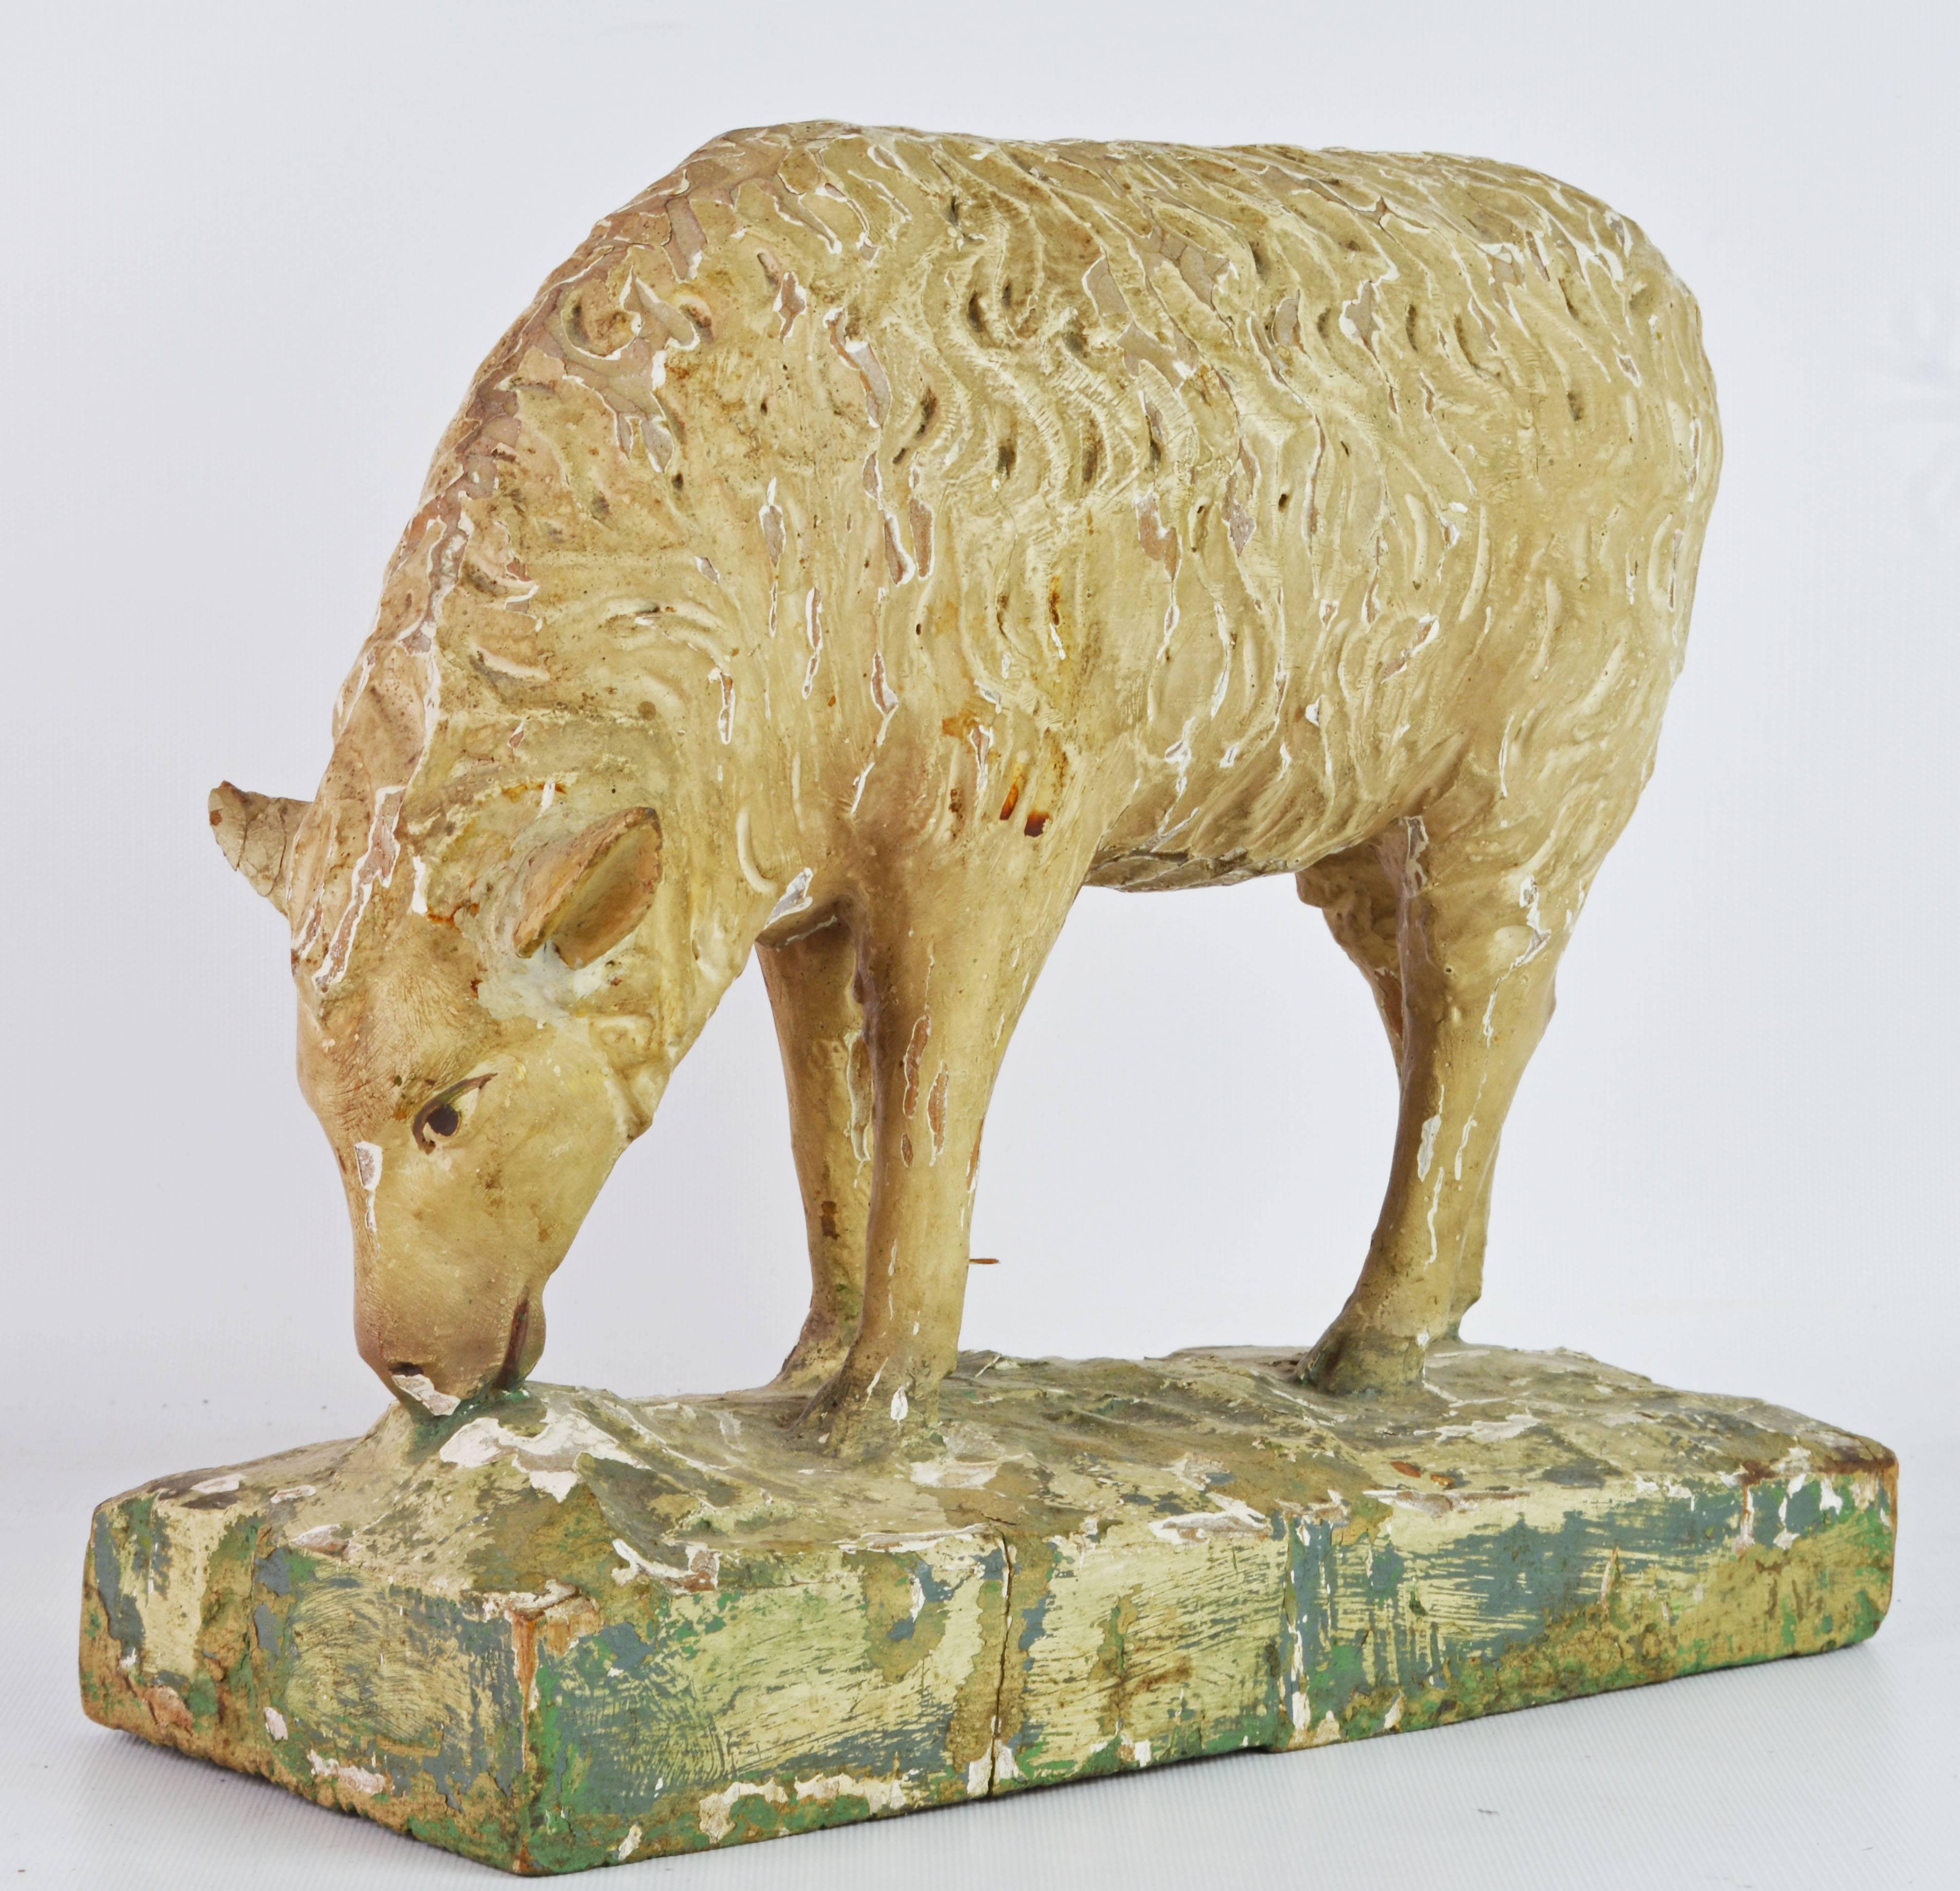 French Provincial Provincial Early 19th Century Carved Grazing Sheep Retaining Original Paint